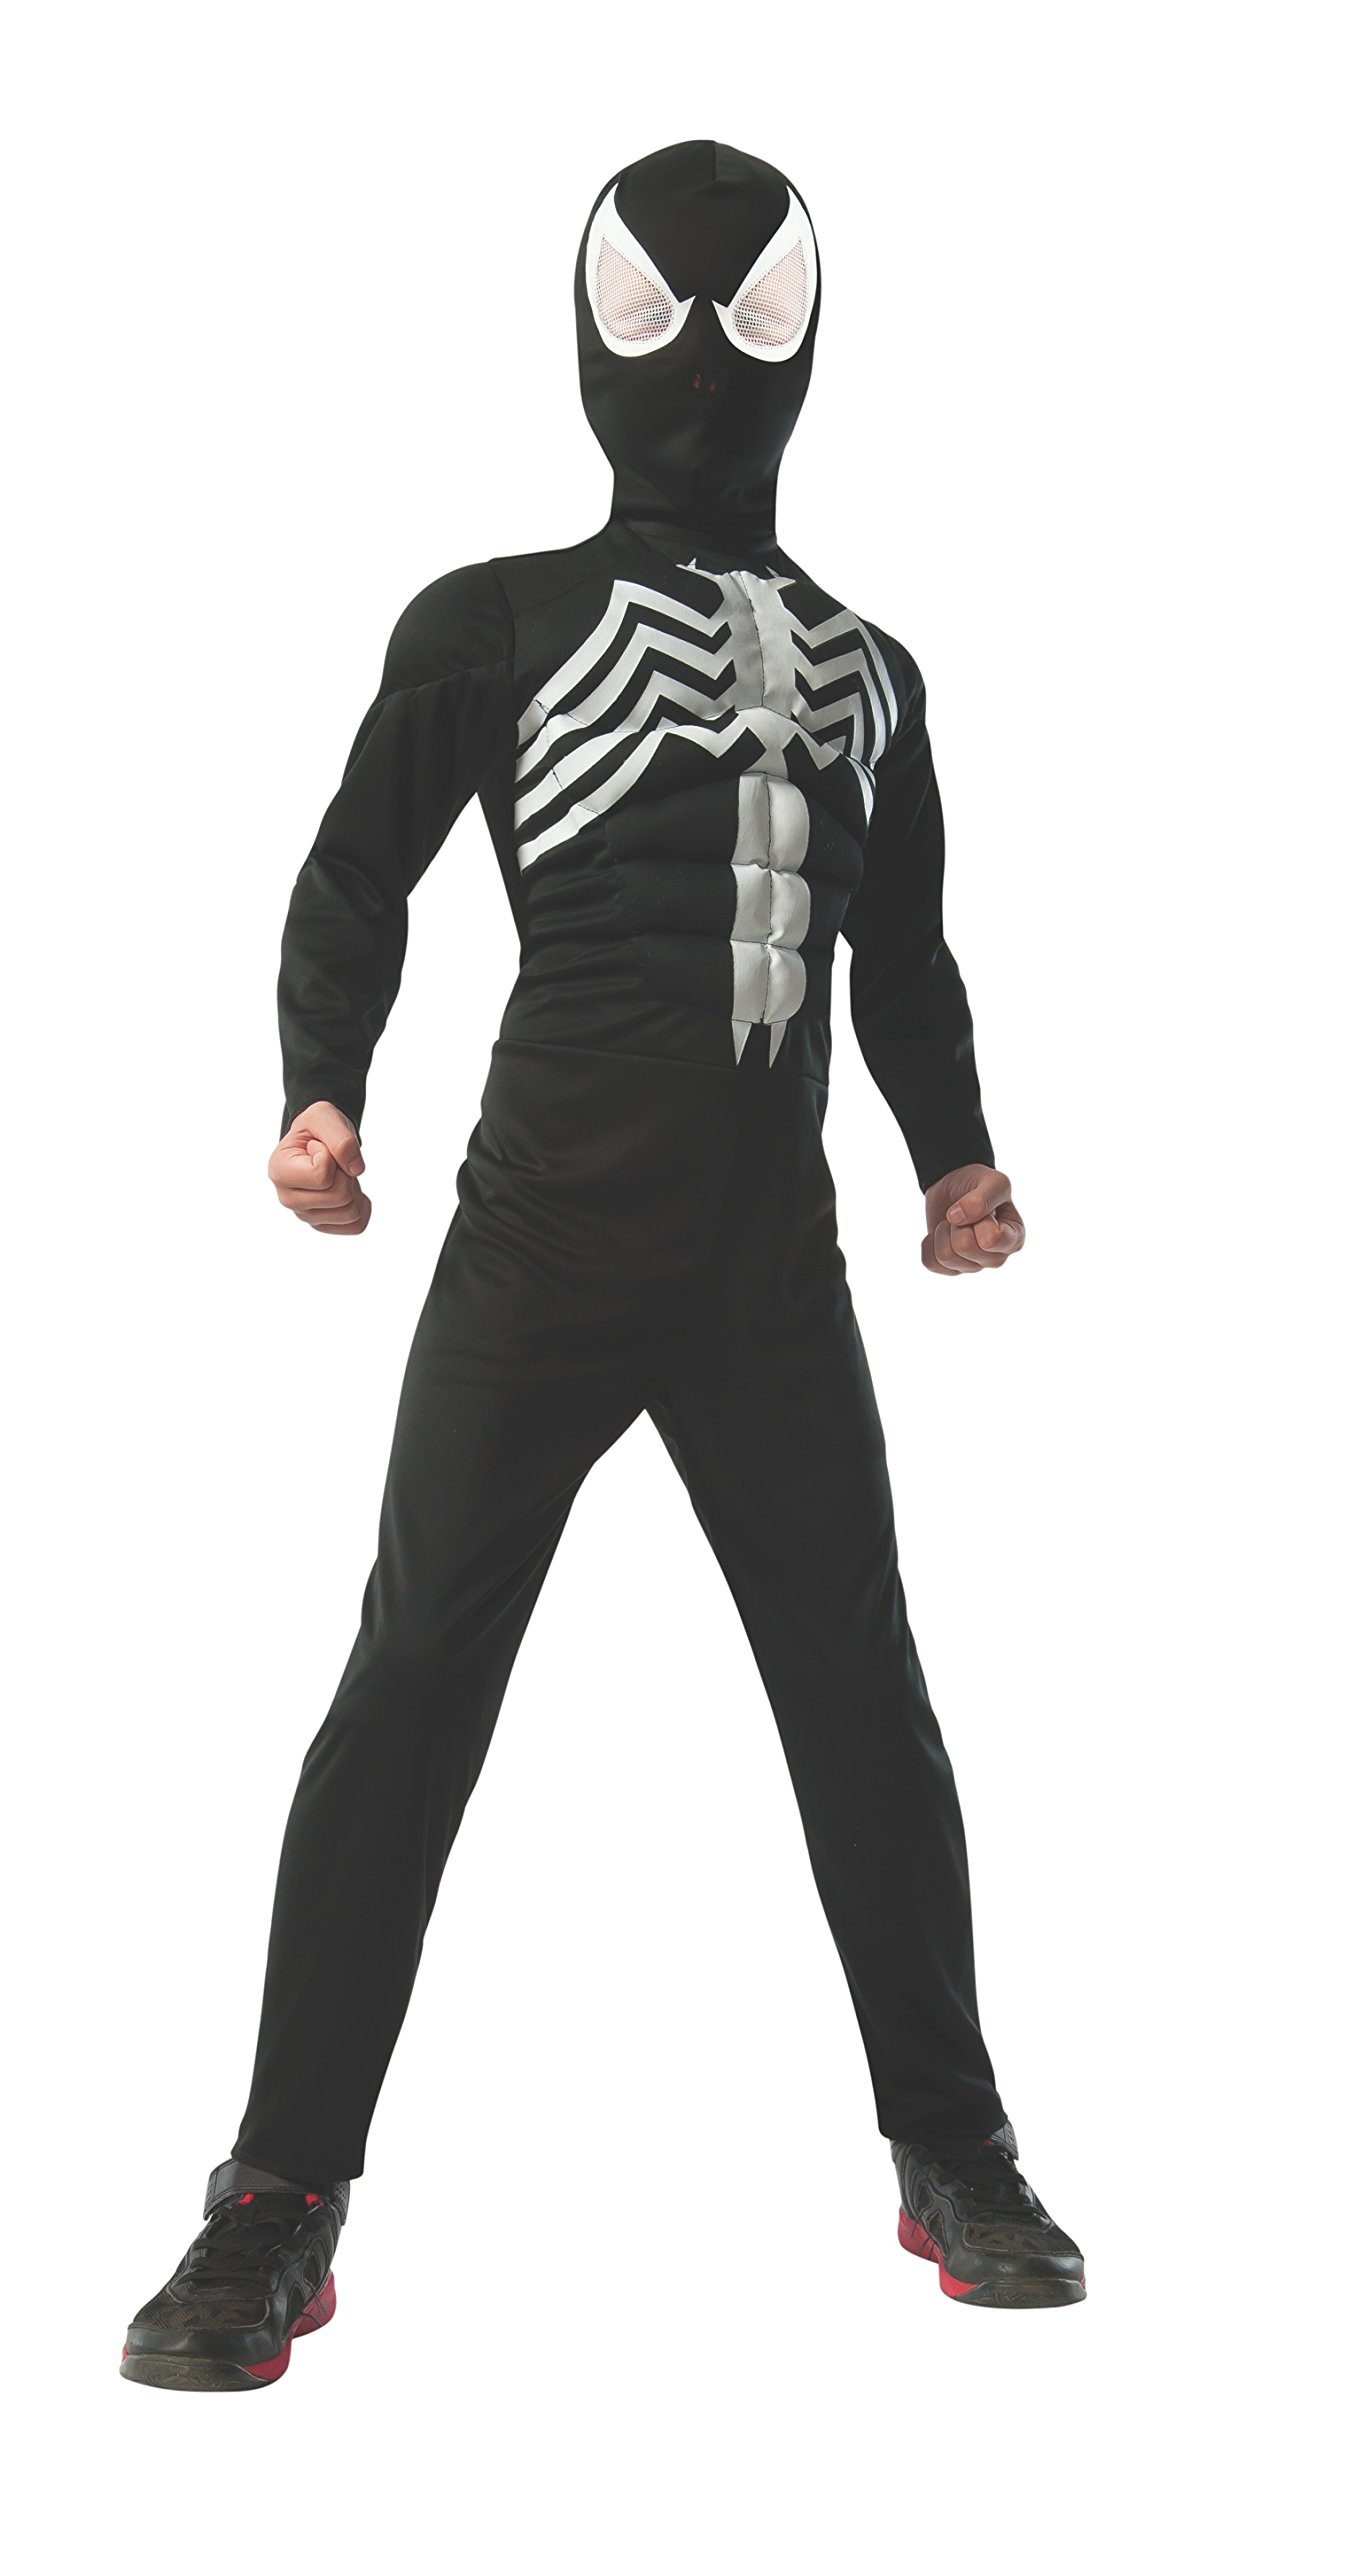 Kids Reversible Ultimate Spider-Man Muscle Costume